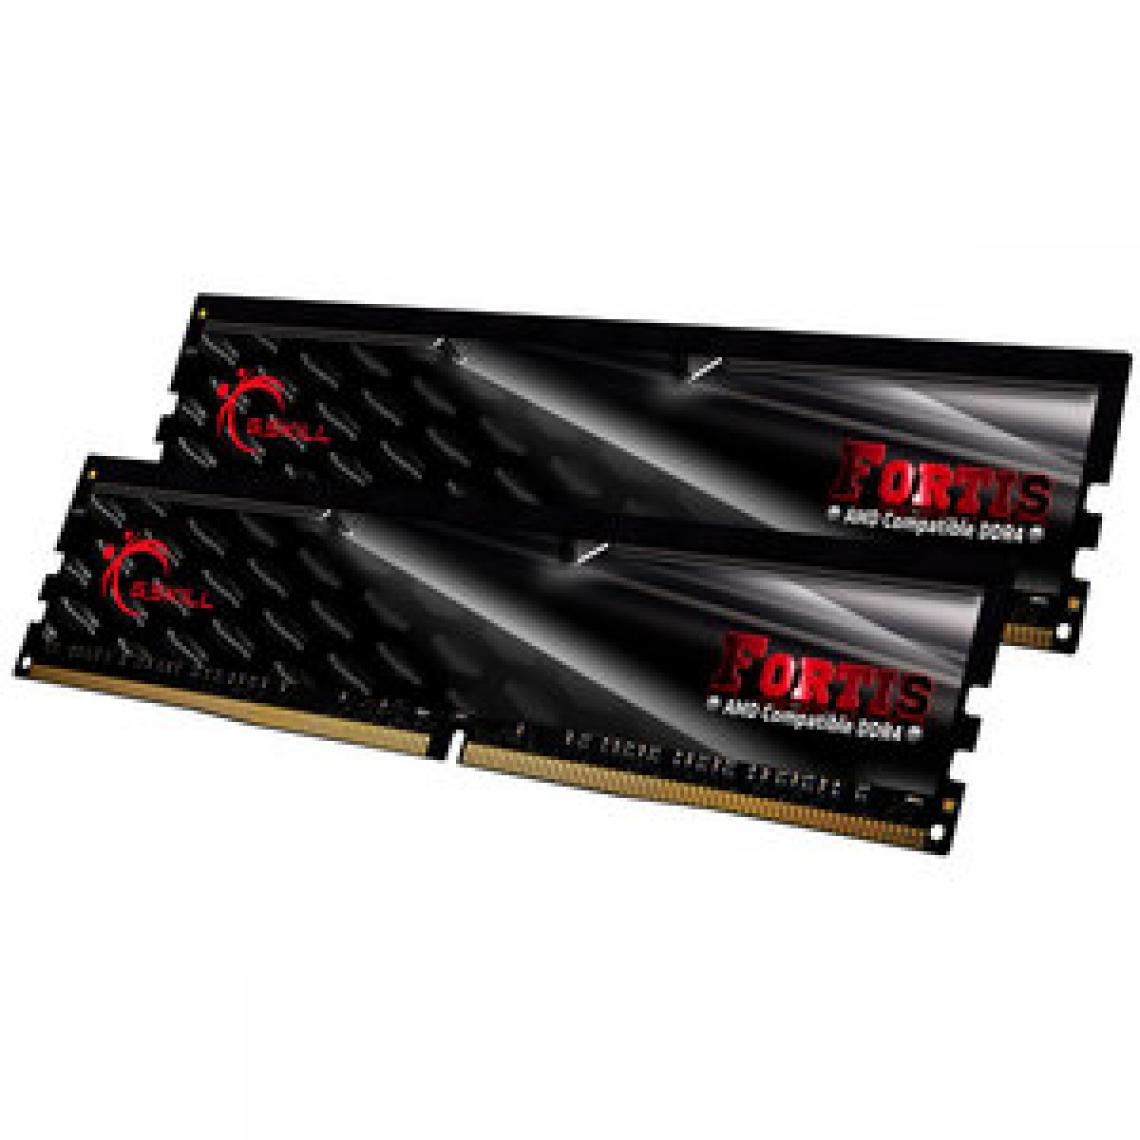 Gskill - Fortis Series 32 Go (2x 16 Go) DDR4 2400 MHz CL15 - RAM PC Fixe